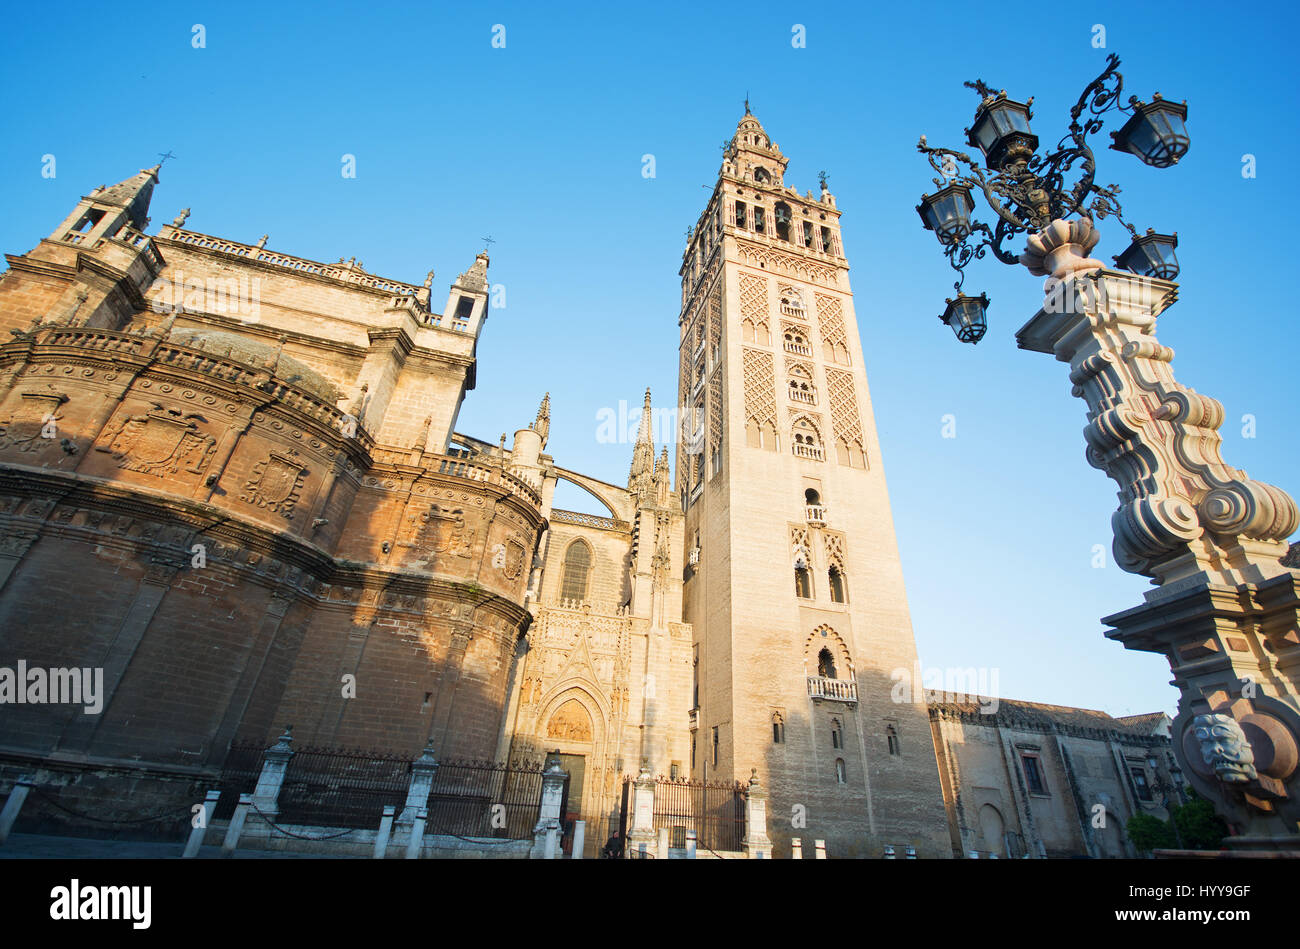 SEVILLE, ANDALUCIA, SPAIN. A low-angle view of Seville Cathedral and its bell tower known as la Giralda, formerly the minaret of Seville's mosque. Stock Photo